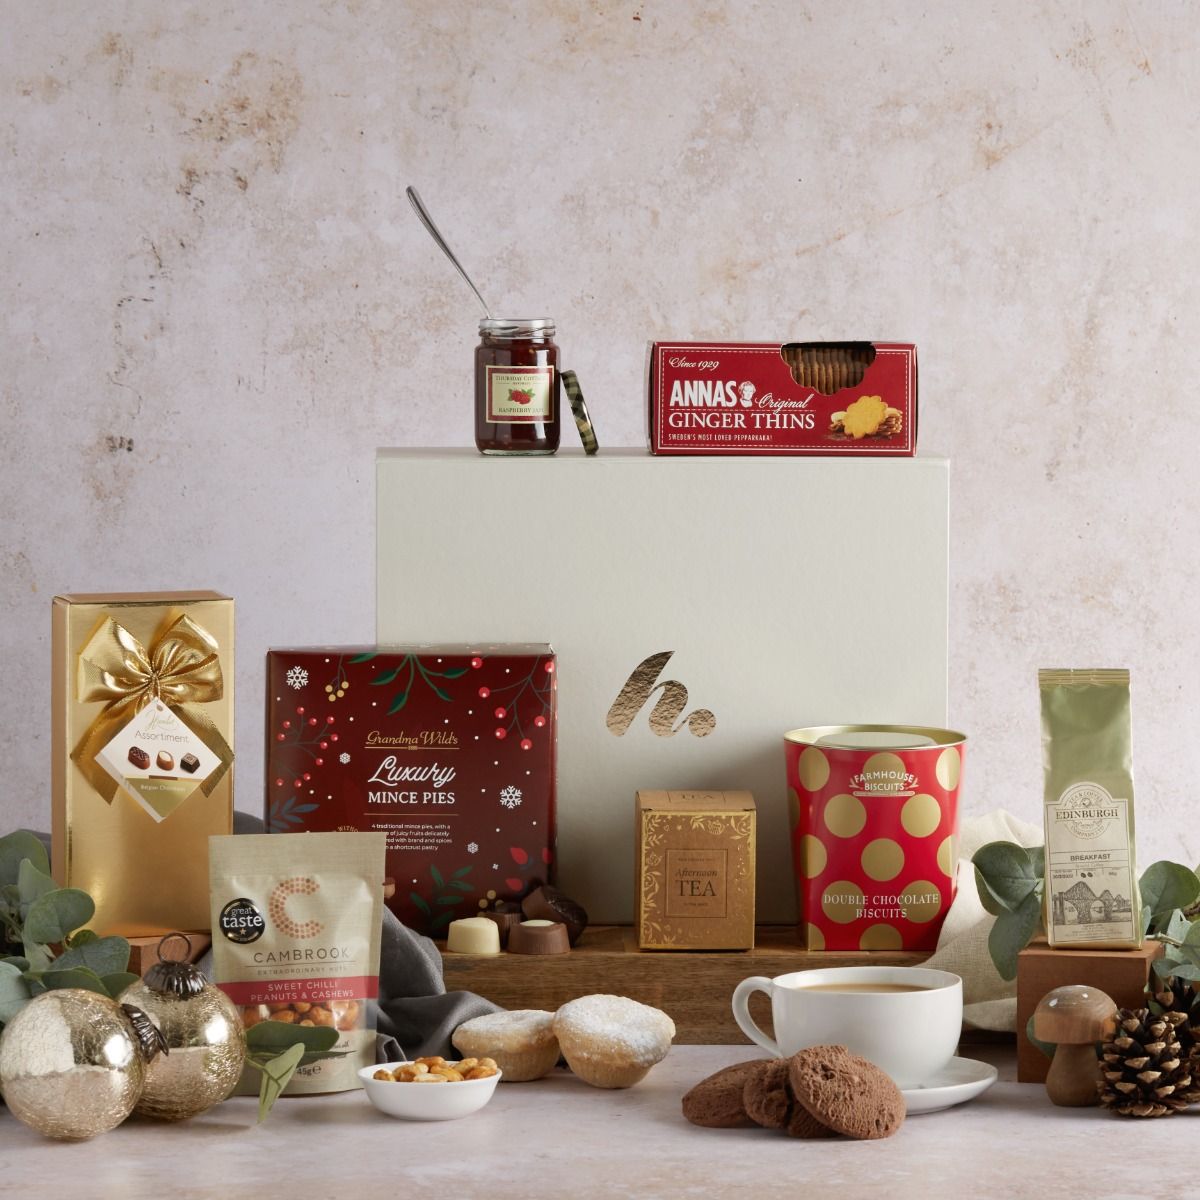 The Christmas Delights Hamper with contents on display and signature gift box